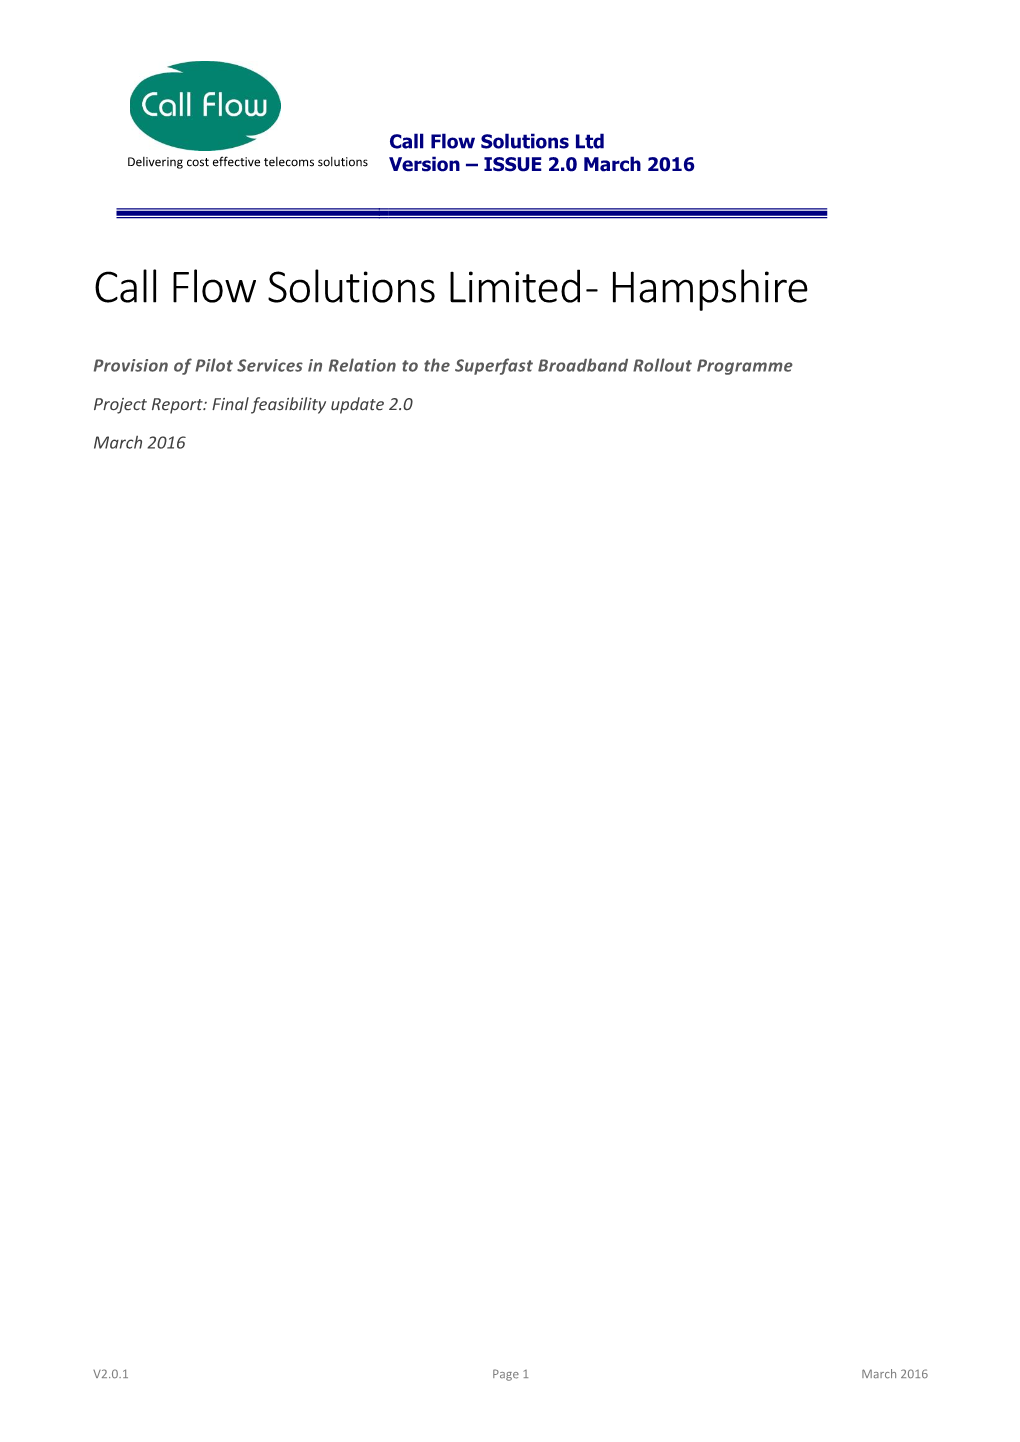 Call Flow Solutions Limited - Hampshire